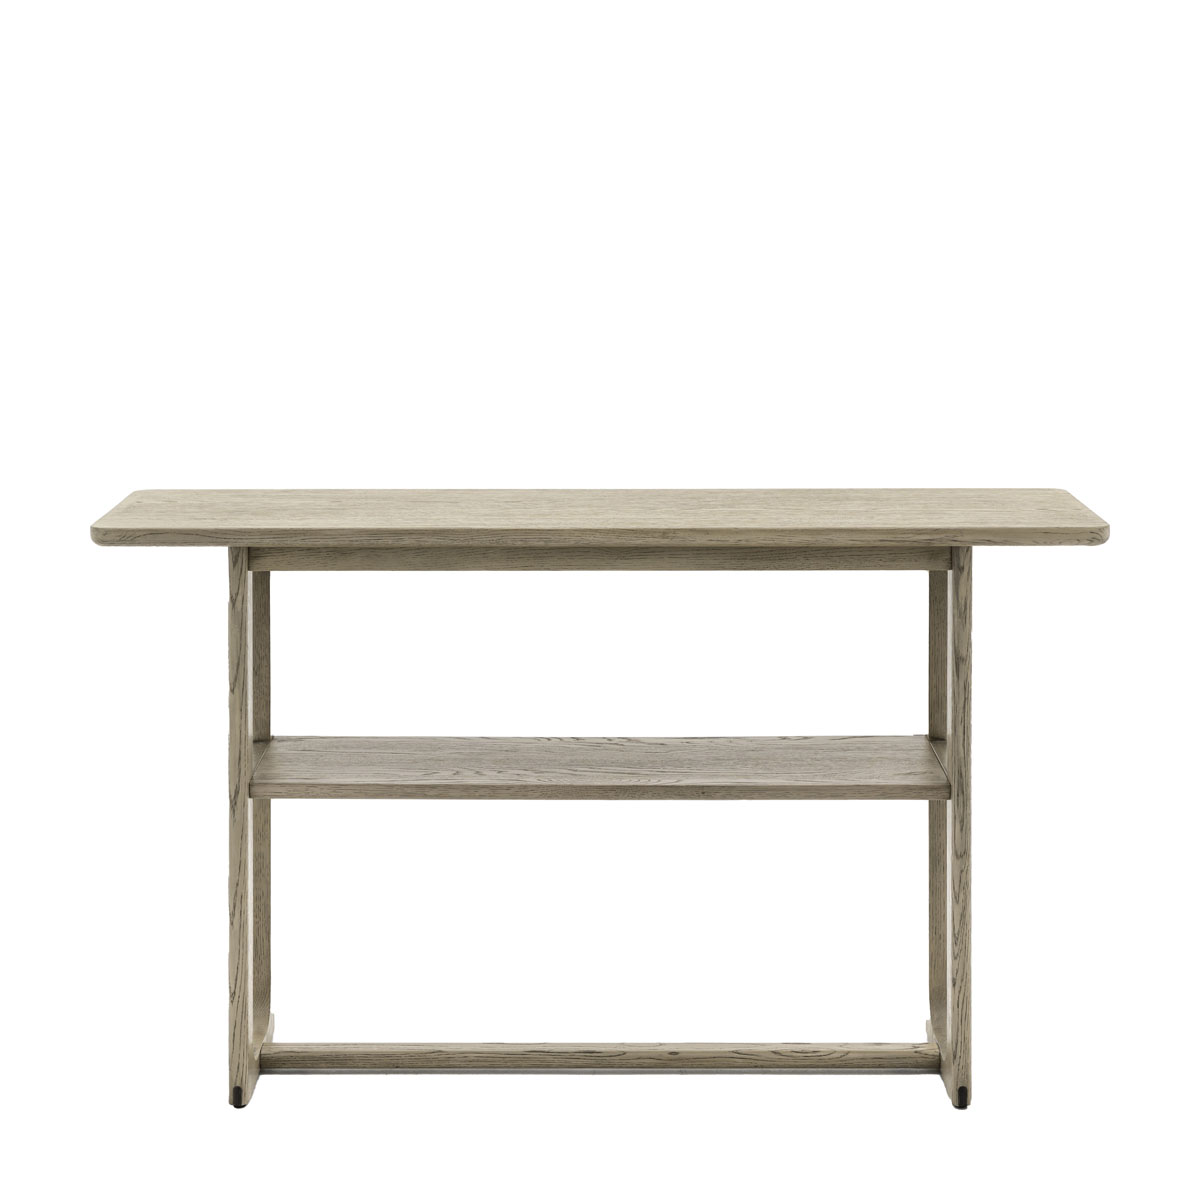 Craft Console Table Smoked 1400x380x800mm